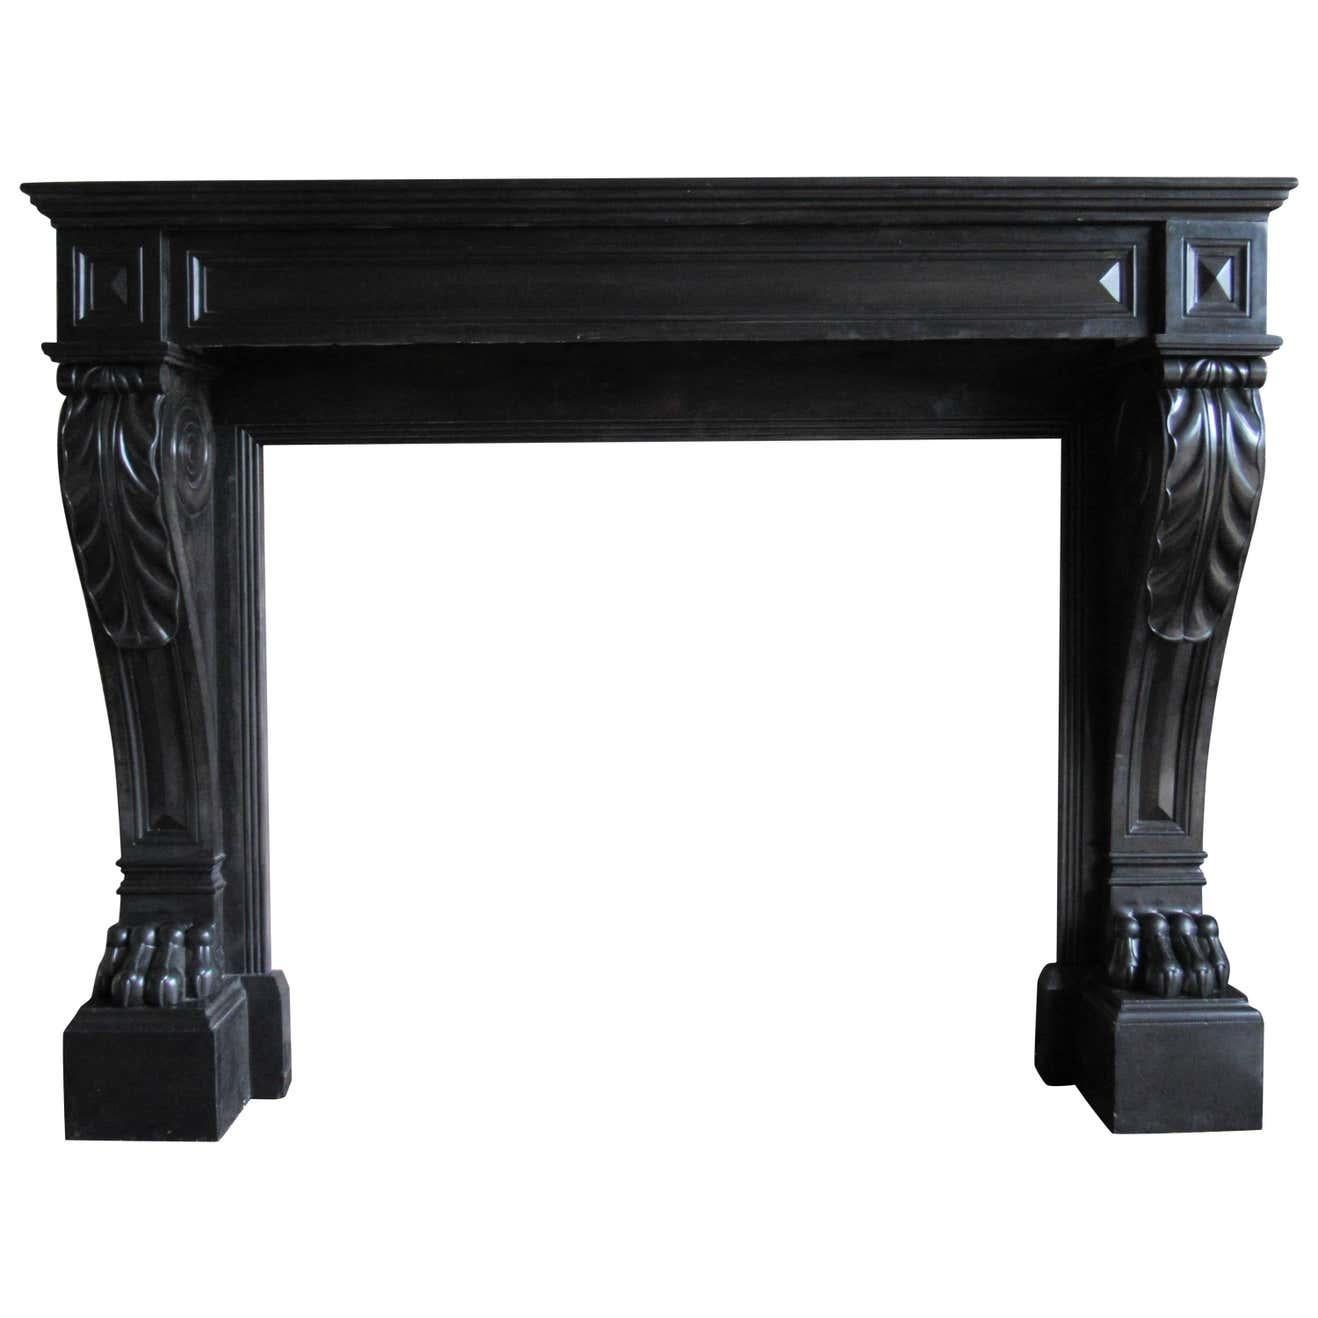 19th Century 'Dated 1813' French Black Napoleon Marble Fireplace